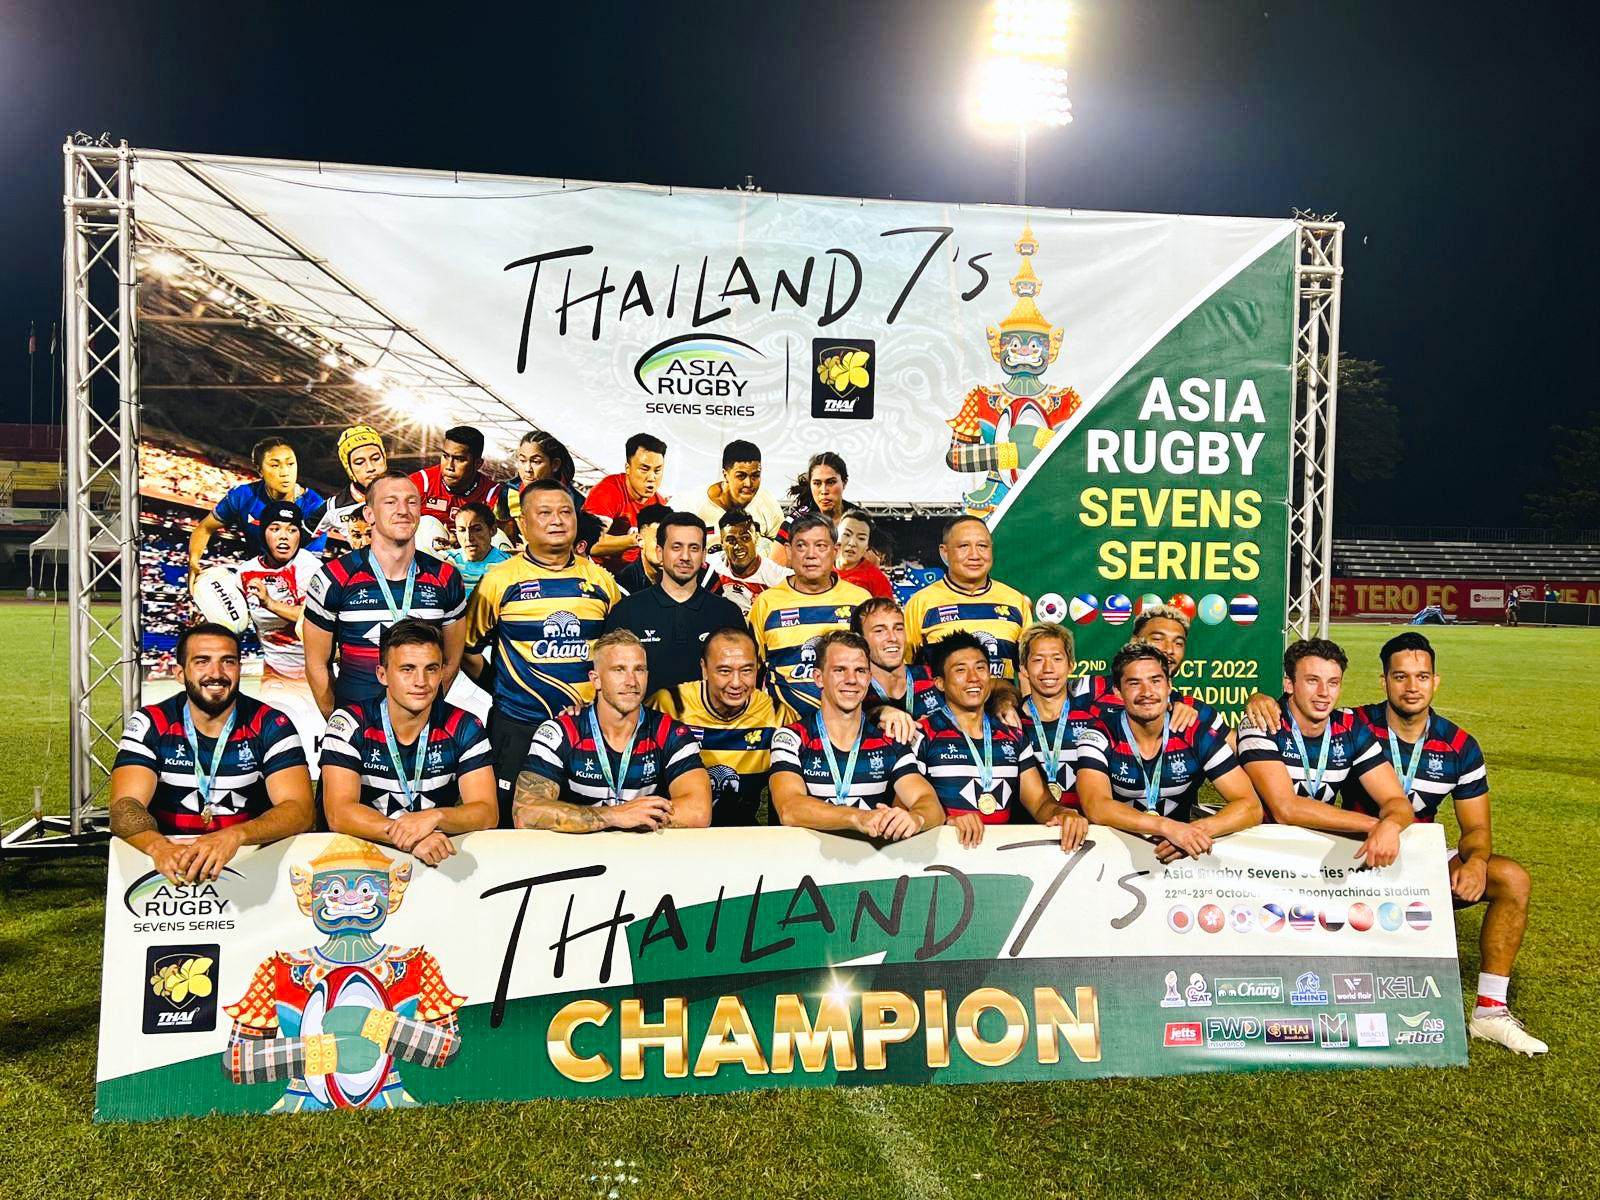 Hong Kong celebrate their win in the first leg of the Asia Rugby Sevens Series in Bangkok. Photos: Handout